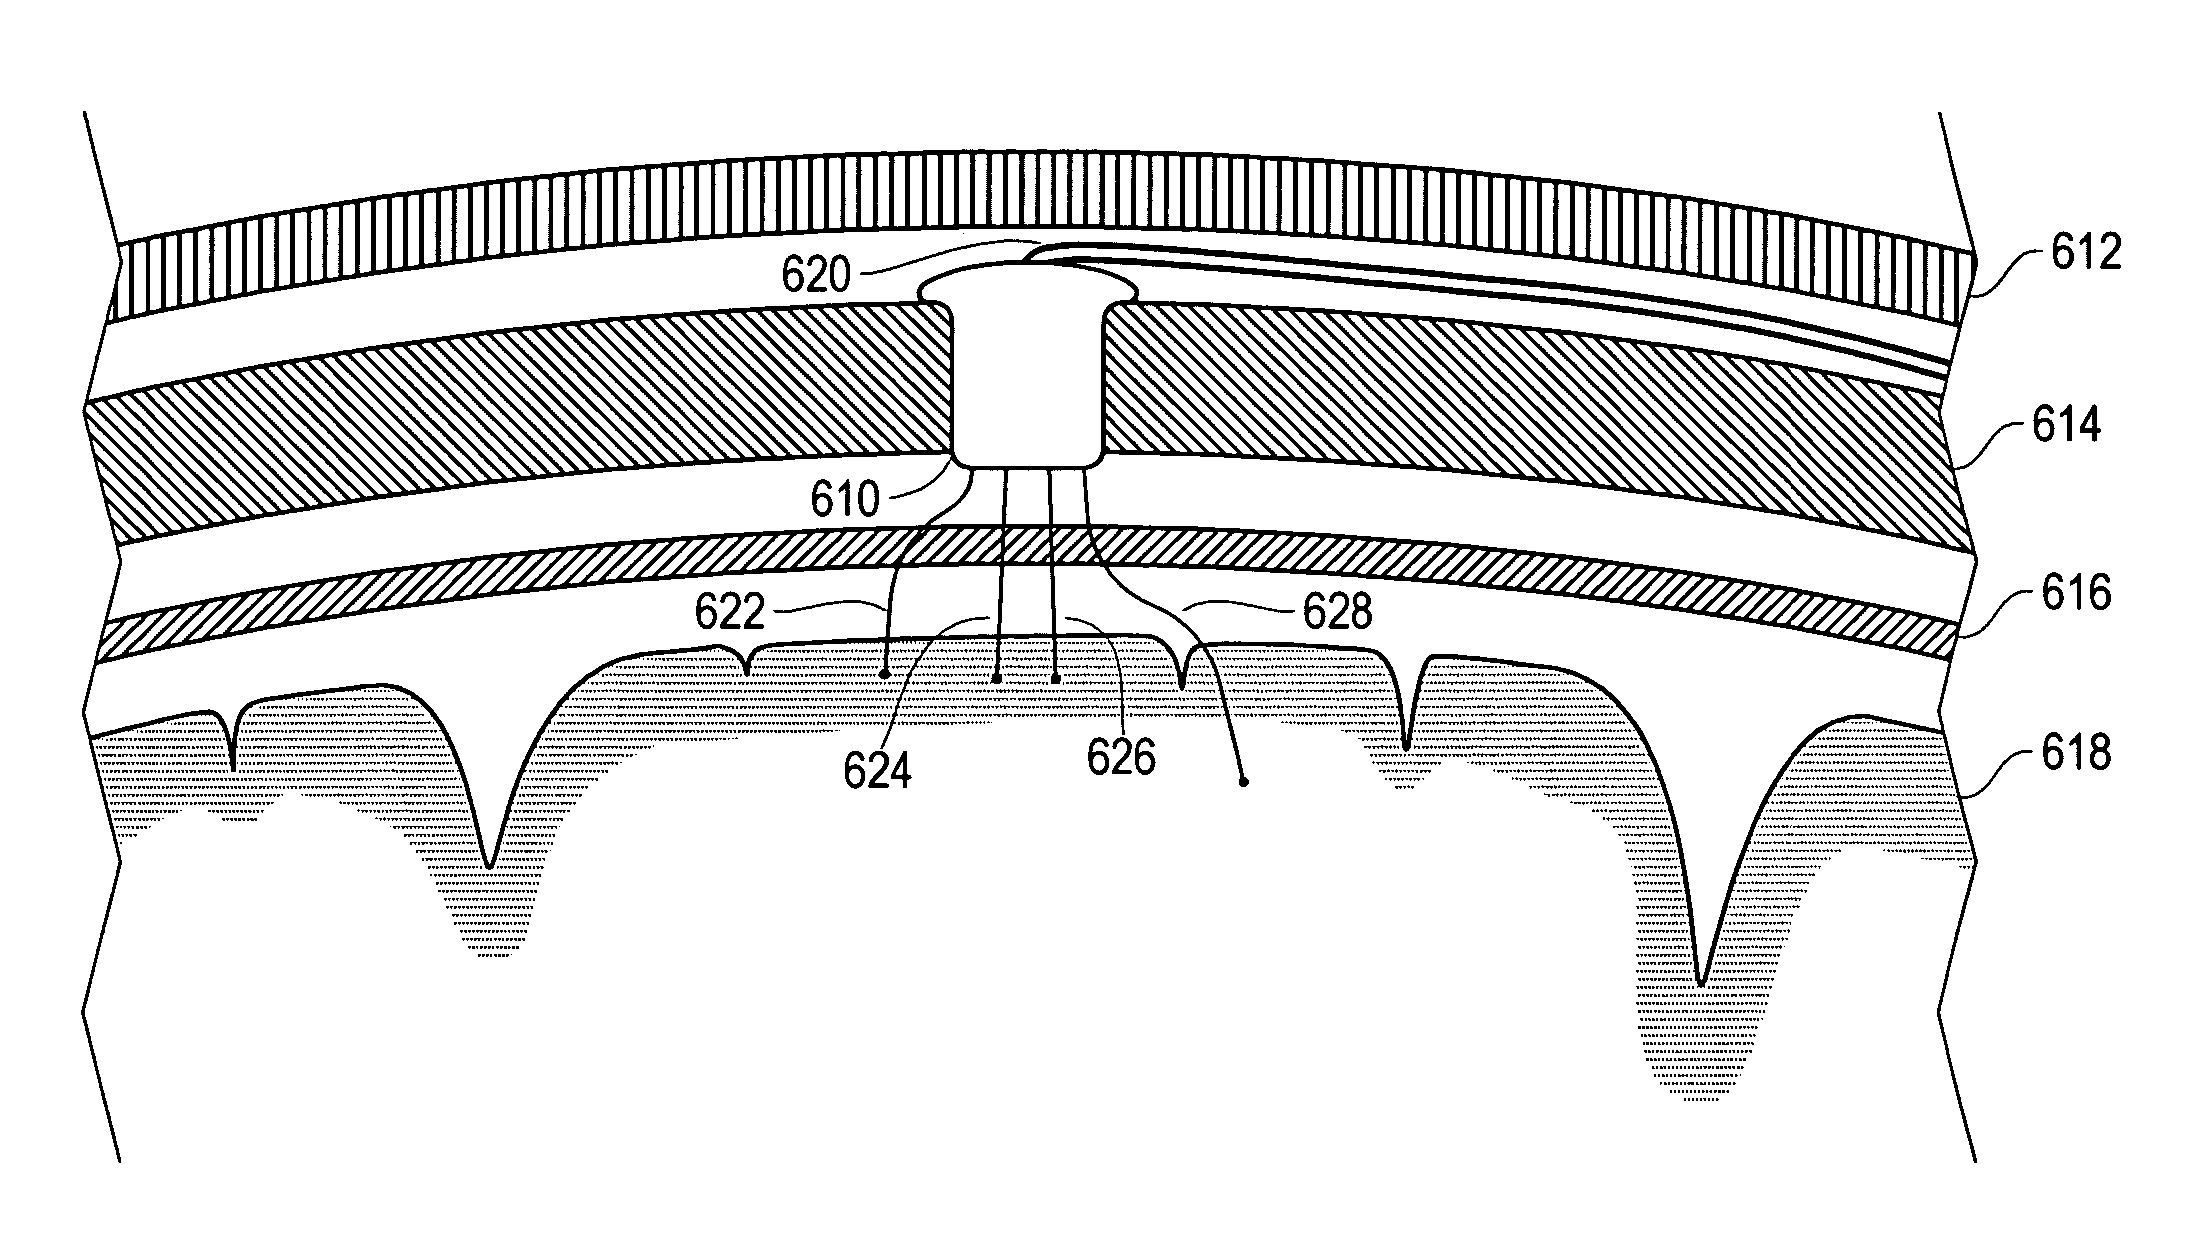 Implantable lead system with seed electrodes